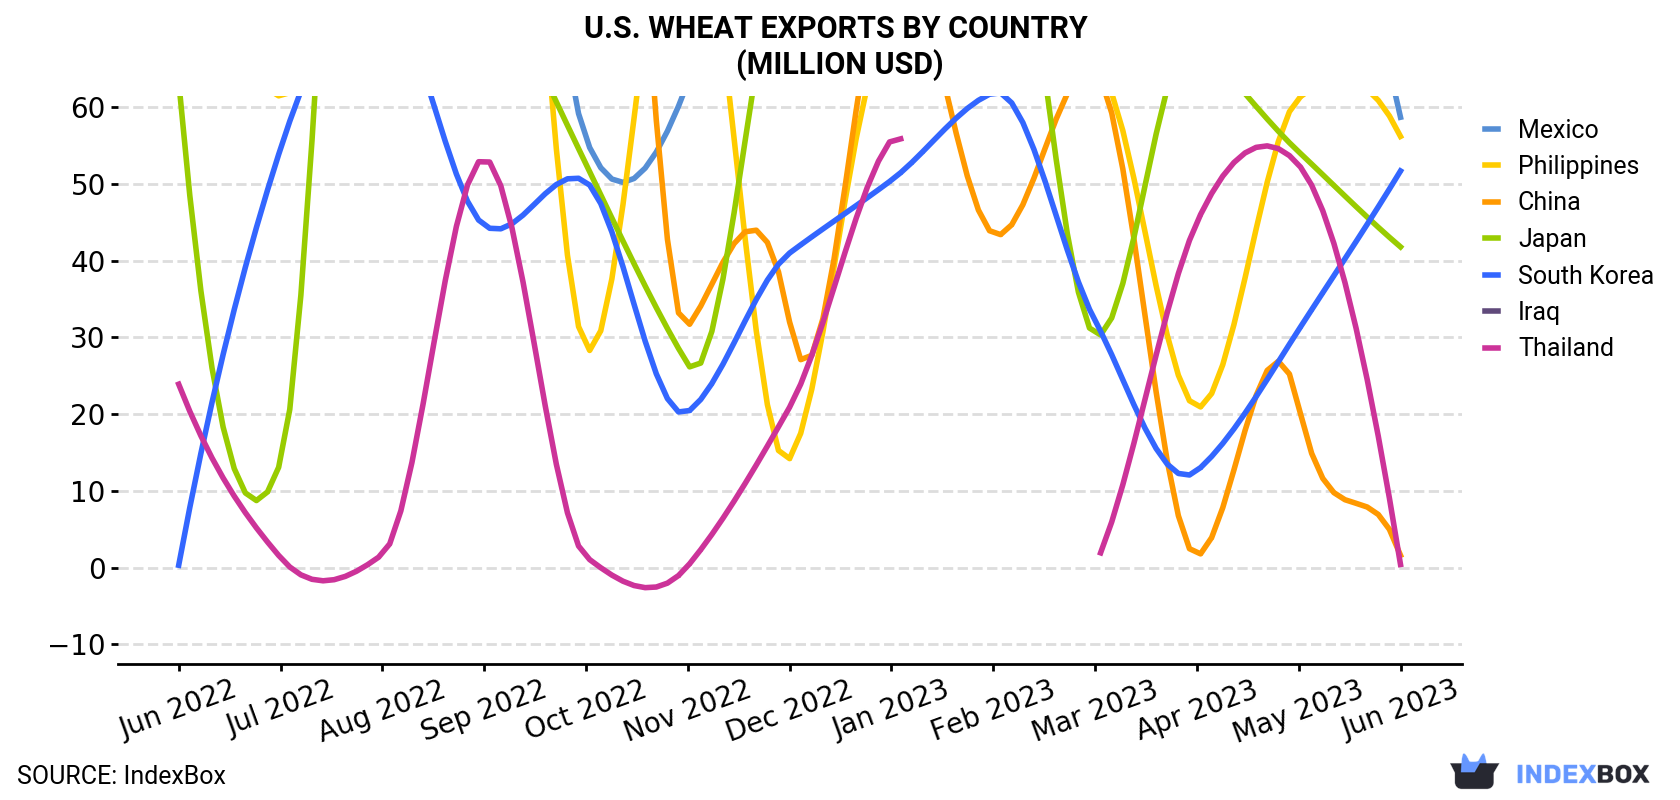 U.S. Wheat Exports By Country (Million USD)